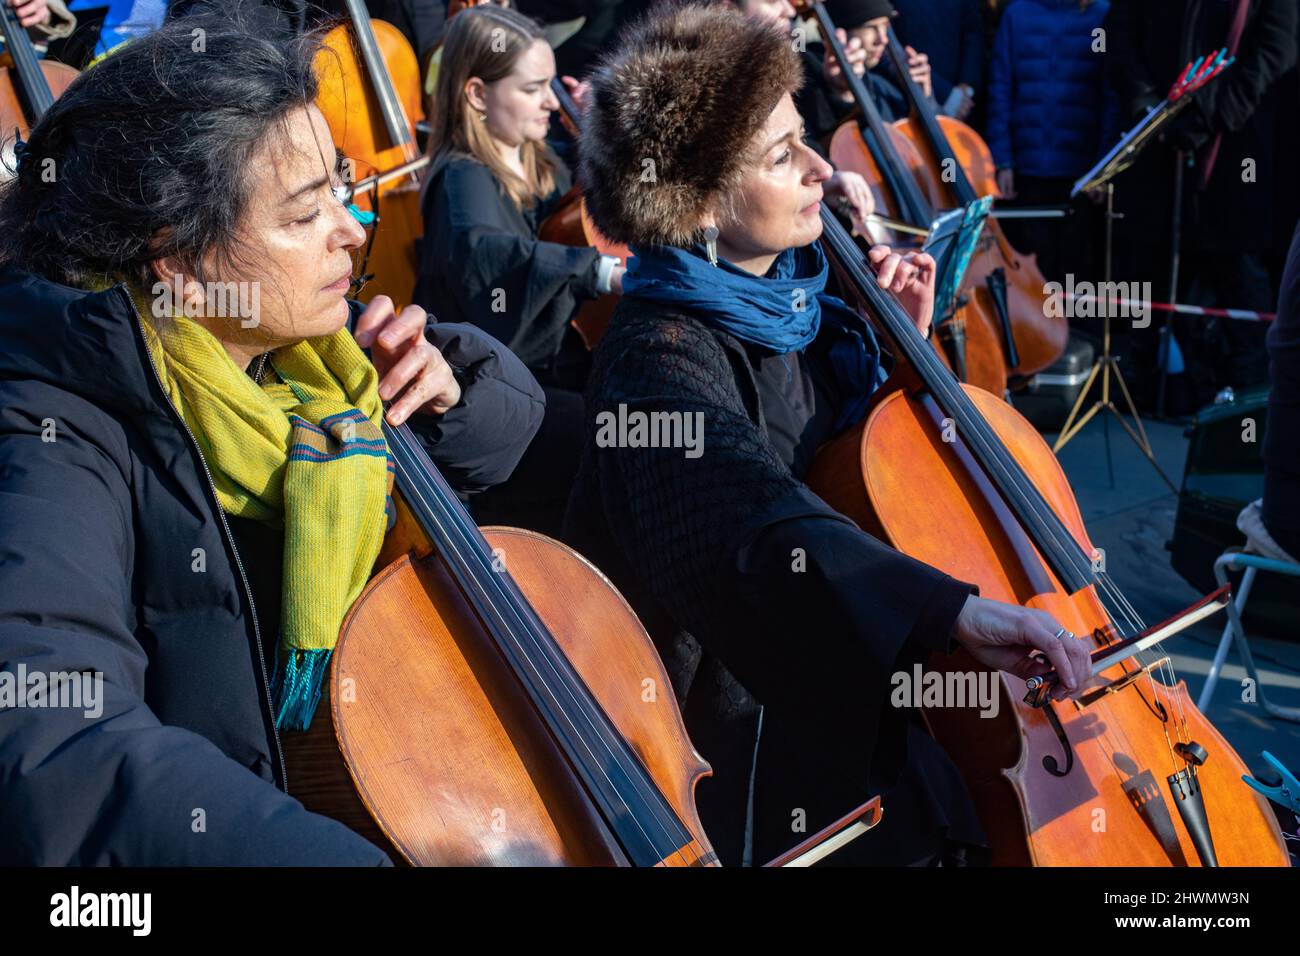 London, England, UK 6 March 2022 Musicians come together in Trafalgar Square to play a concert for peace, in solidarity with the Ukrainian people Credit: Denise Laura Baker/Alamy Live News Stock Photo